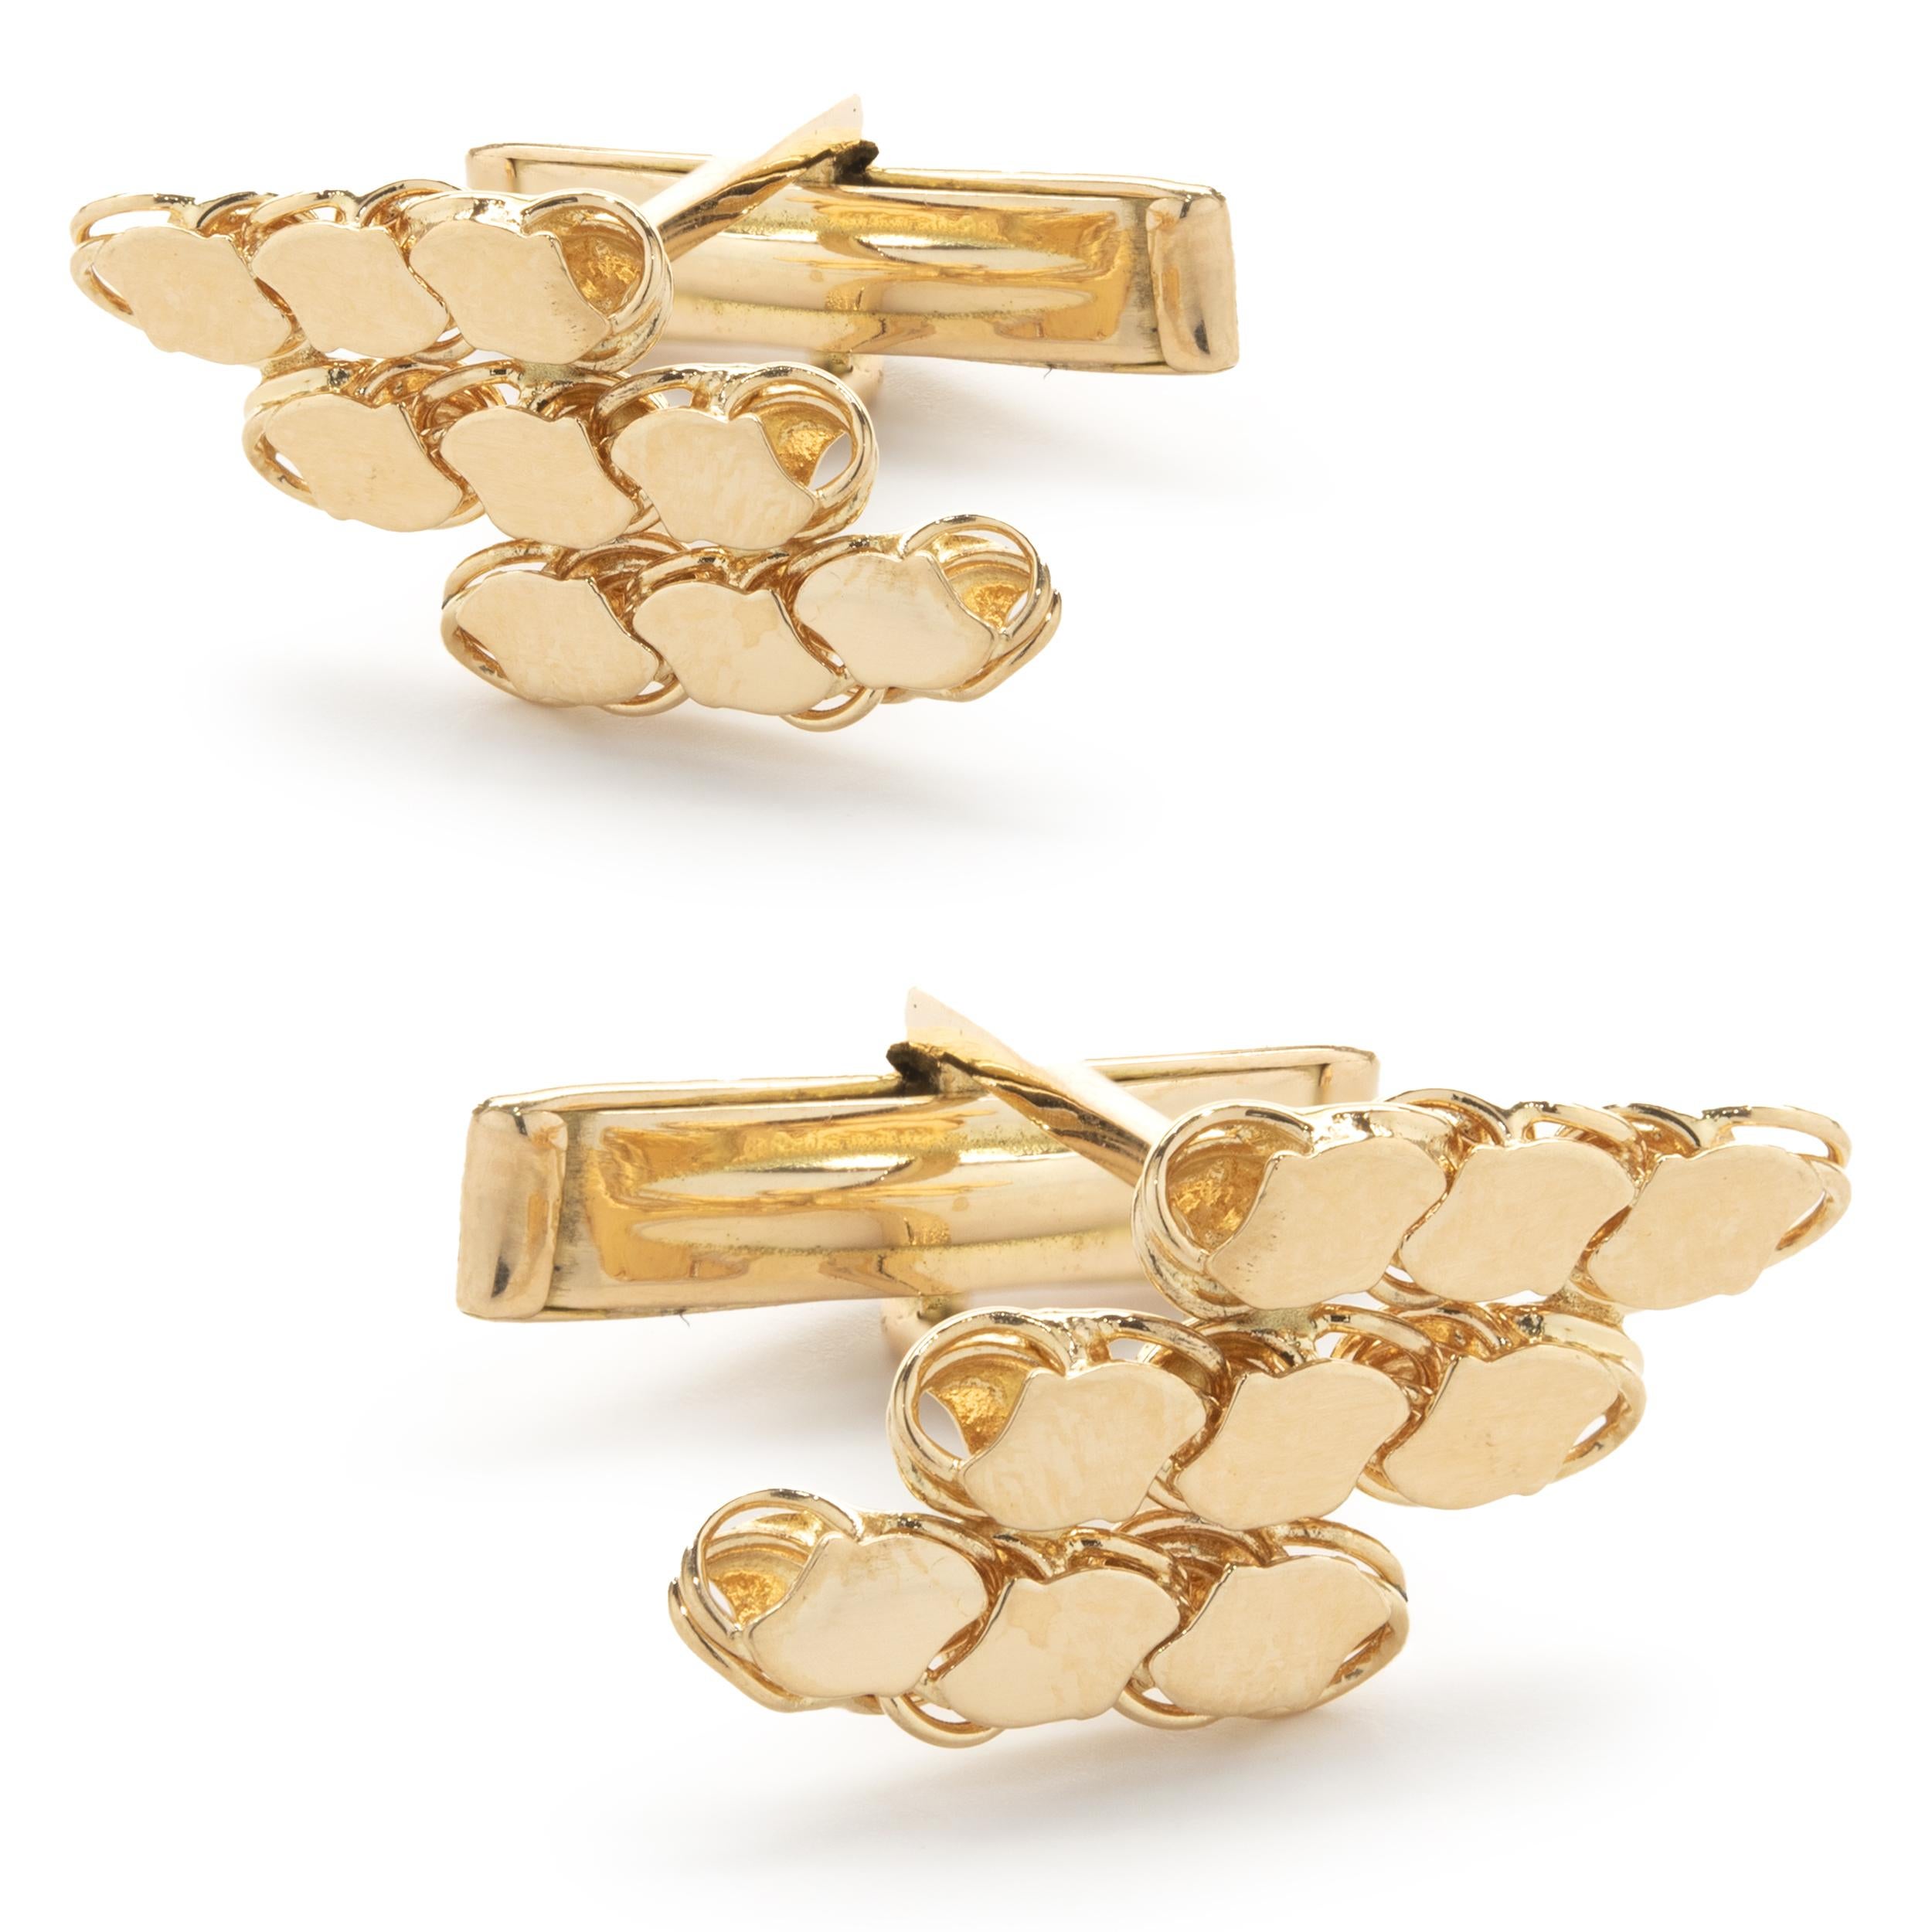 Material: 18K yellow gold
Dimensions: cufflinks measure 12.5mm 
Weight: 9.62 grams